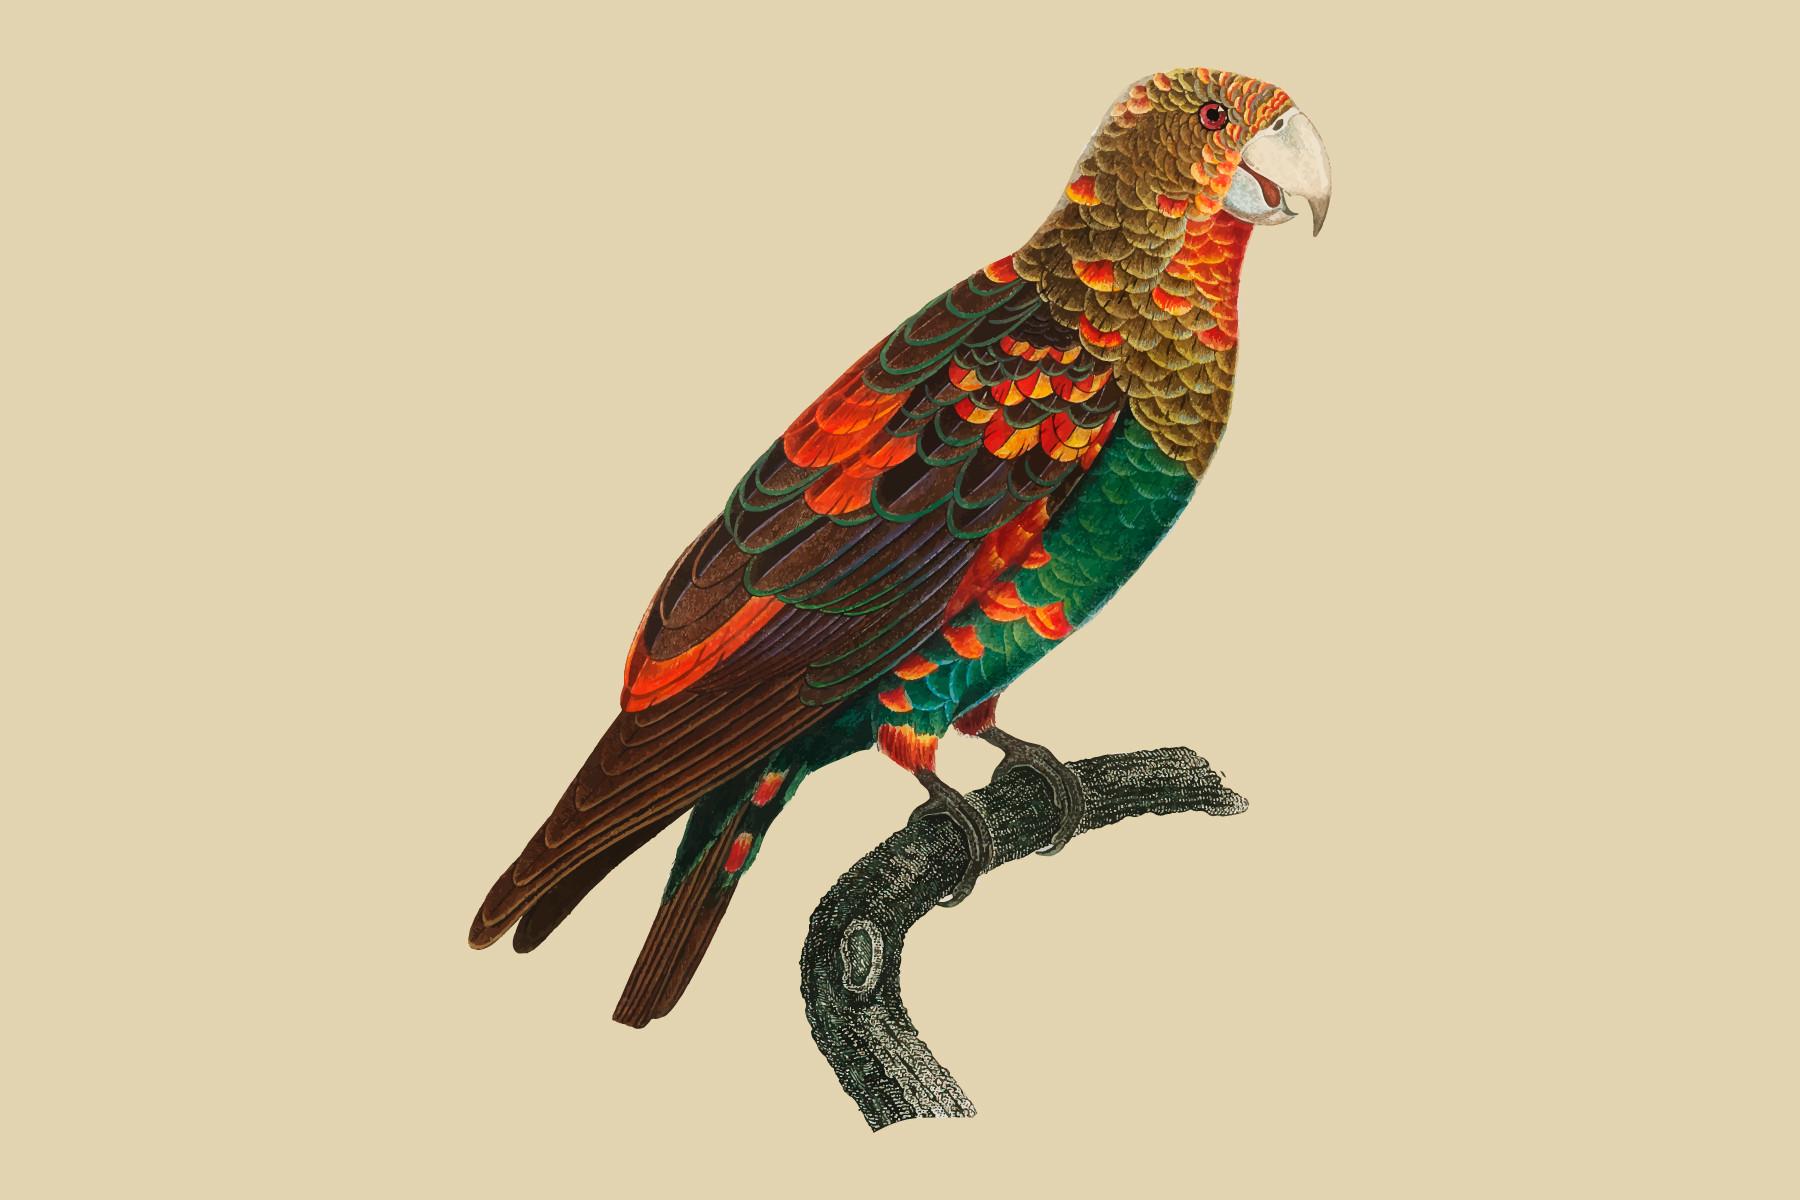 The Brown-Necked Parrot Illustration